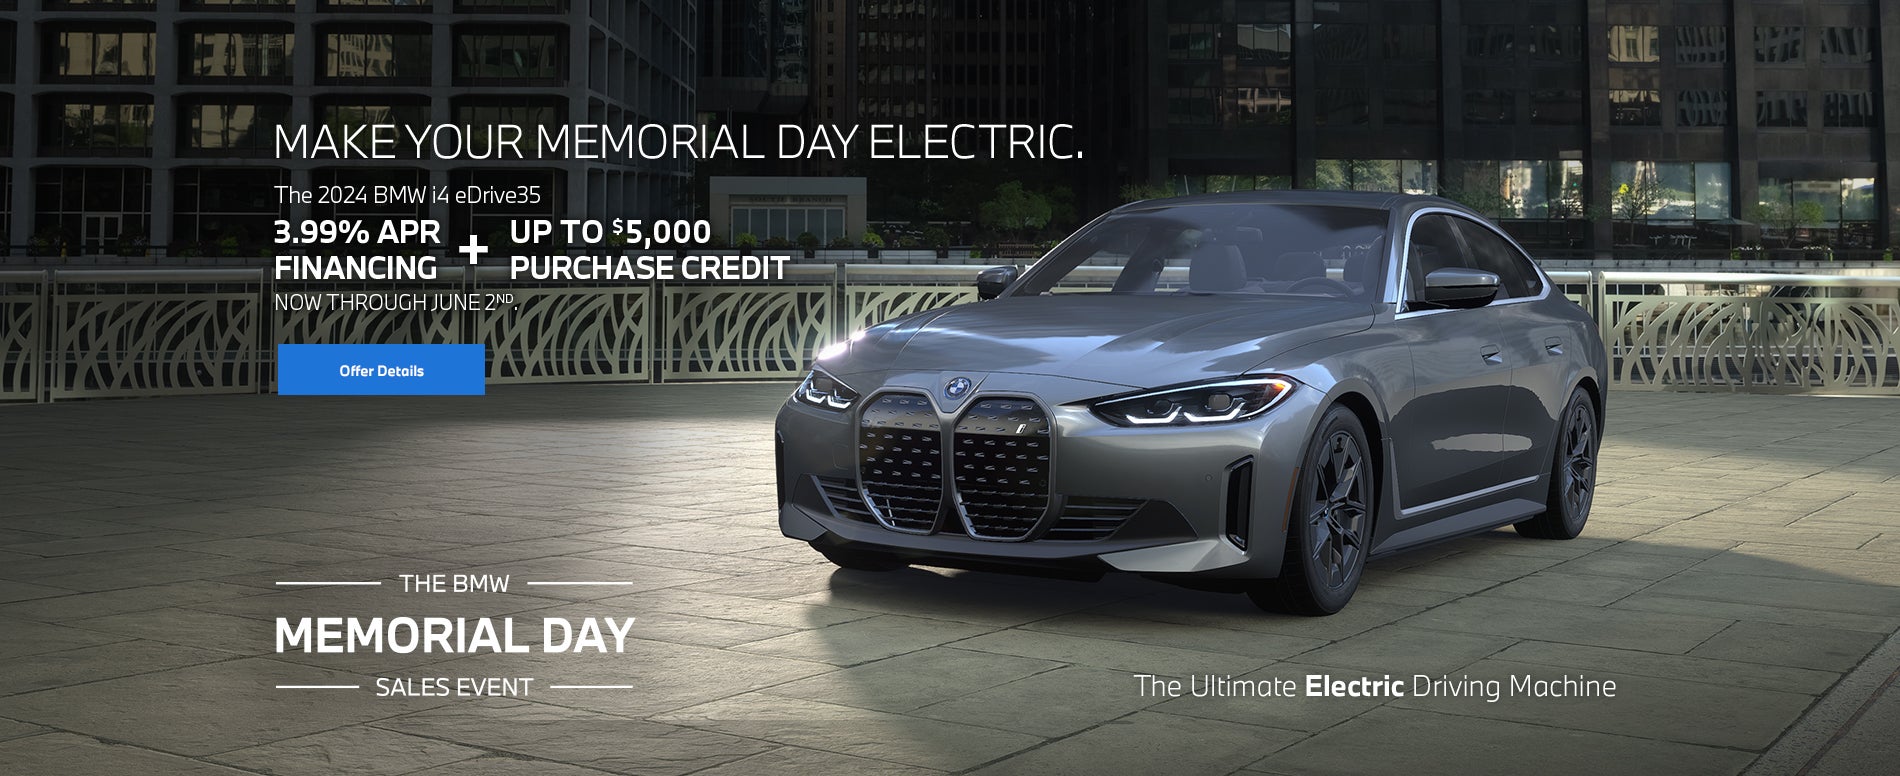 2024 i4 3.99% APR + up to $5000 purchase credit